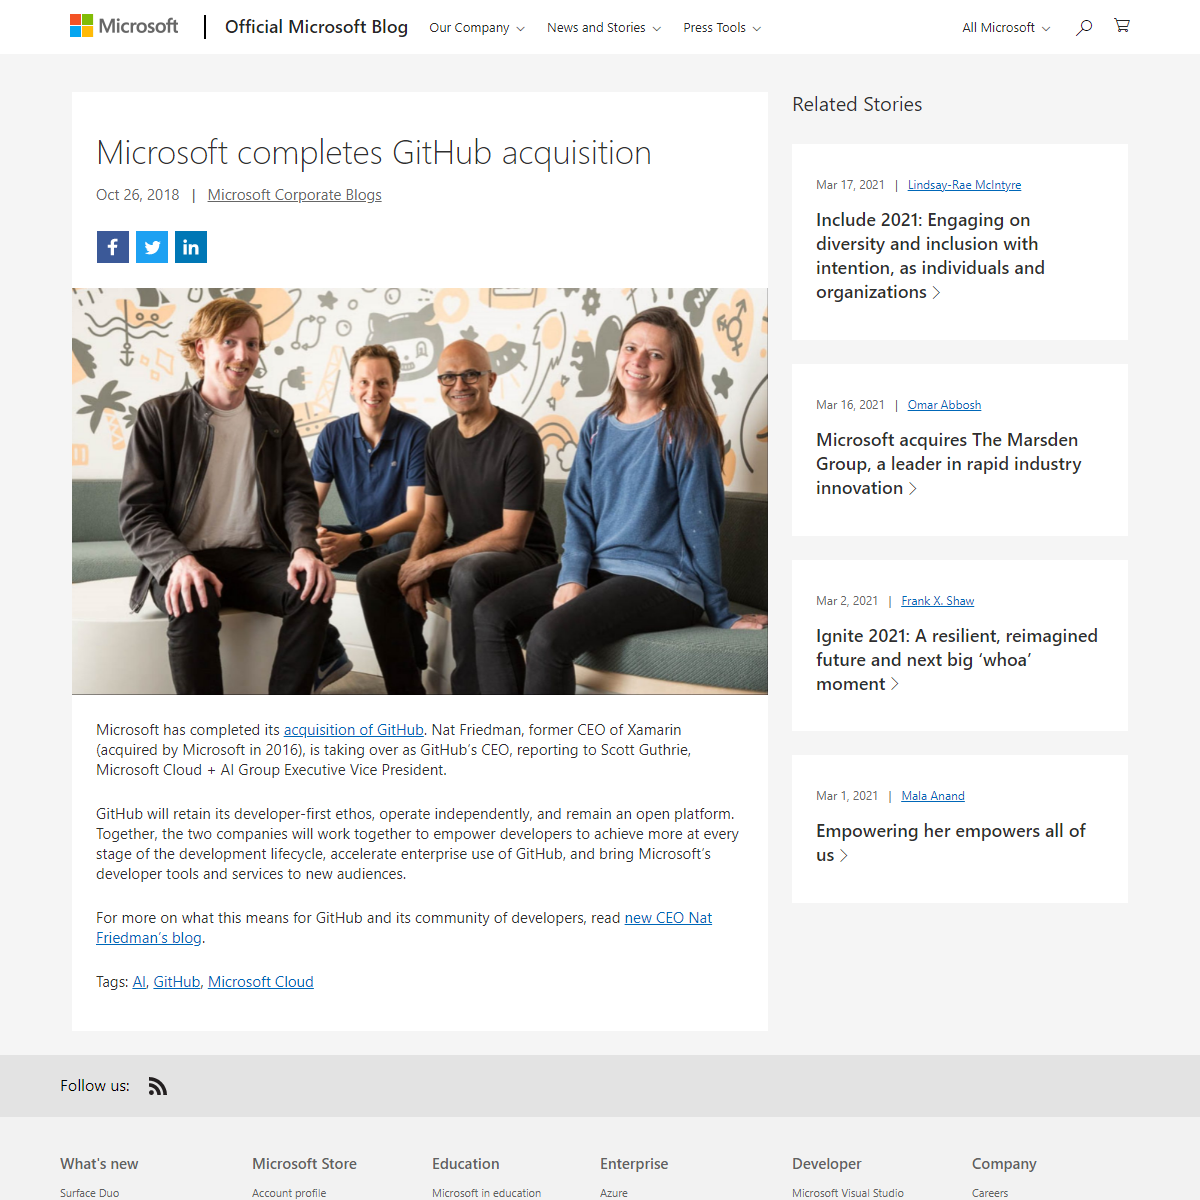 A complete backup of https://blogs.microsoft.com/blog/2018/10/26/microsoft-completes-github-acquisition/